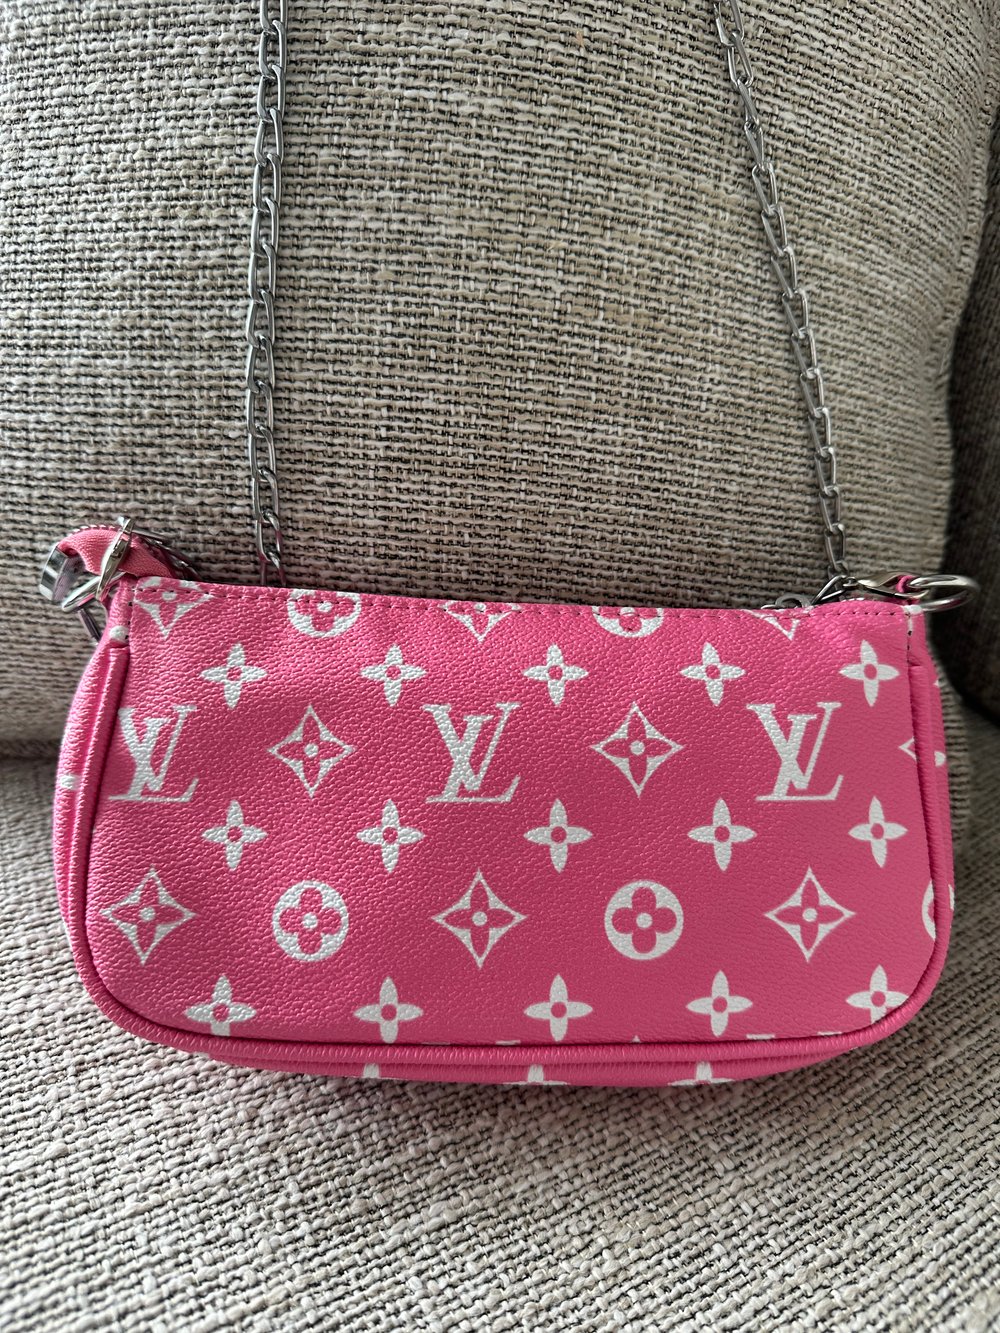 Image of Lv pouch 